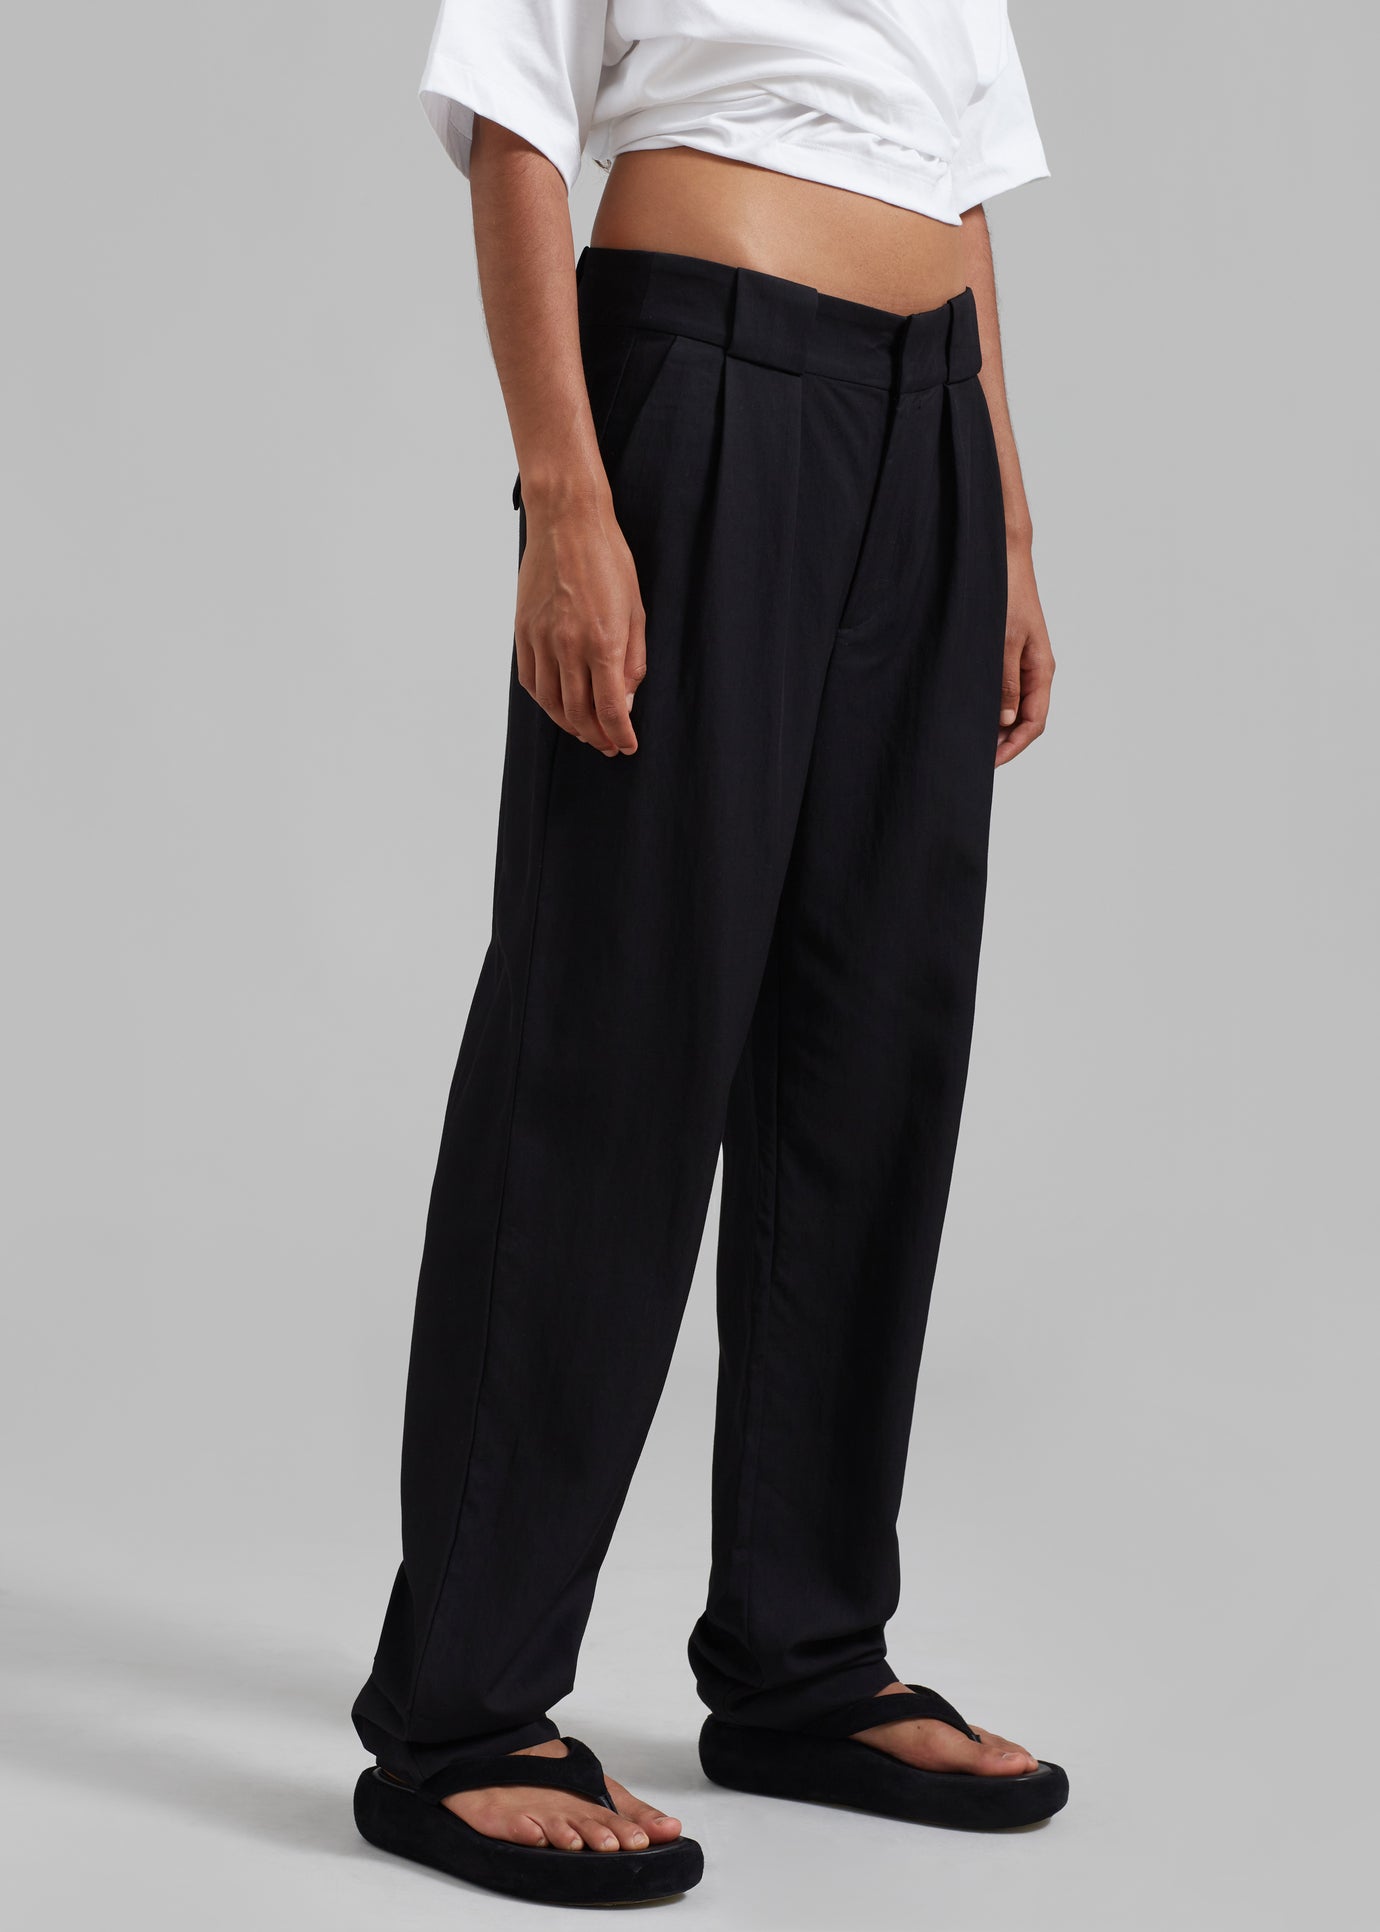 Proenza Schouler White Label Drapey Suiting Trousers - Black - 1